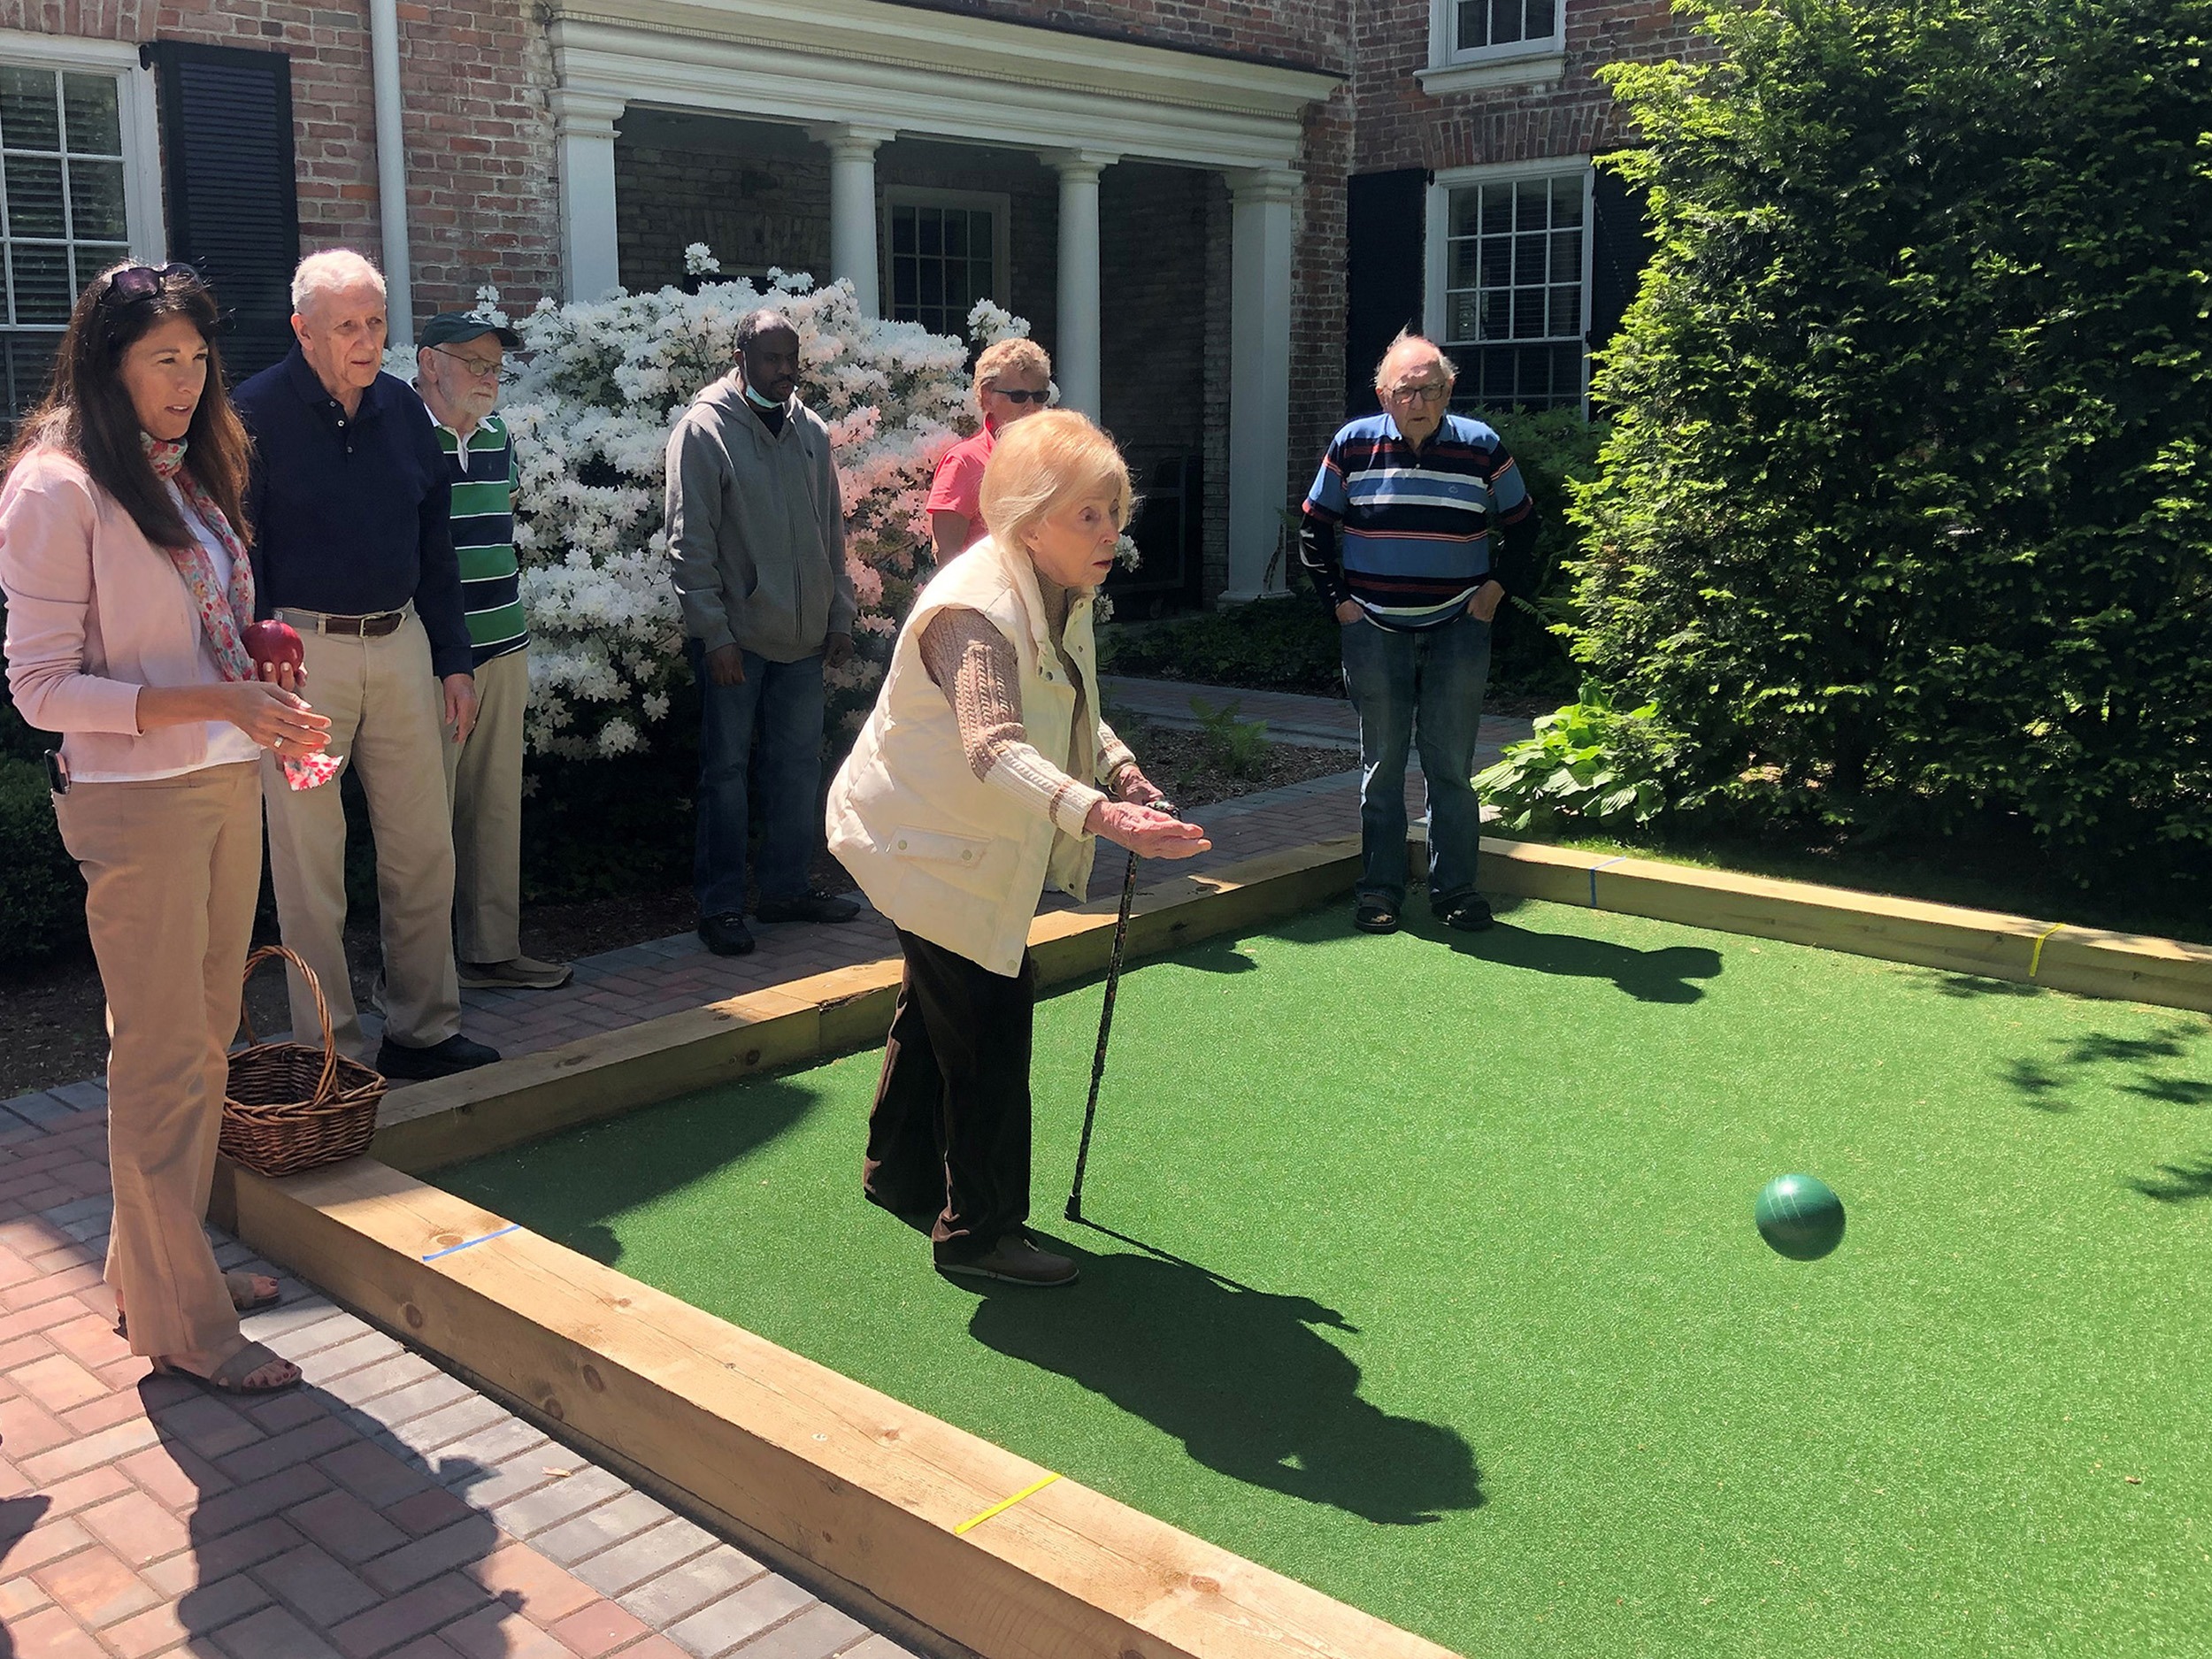 Bocce Ball at the Helm